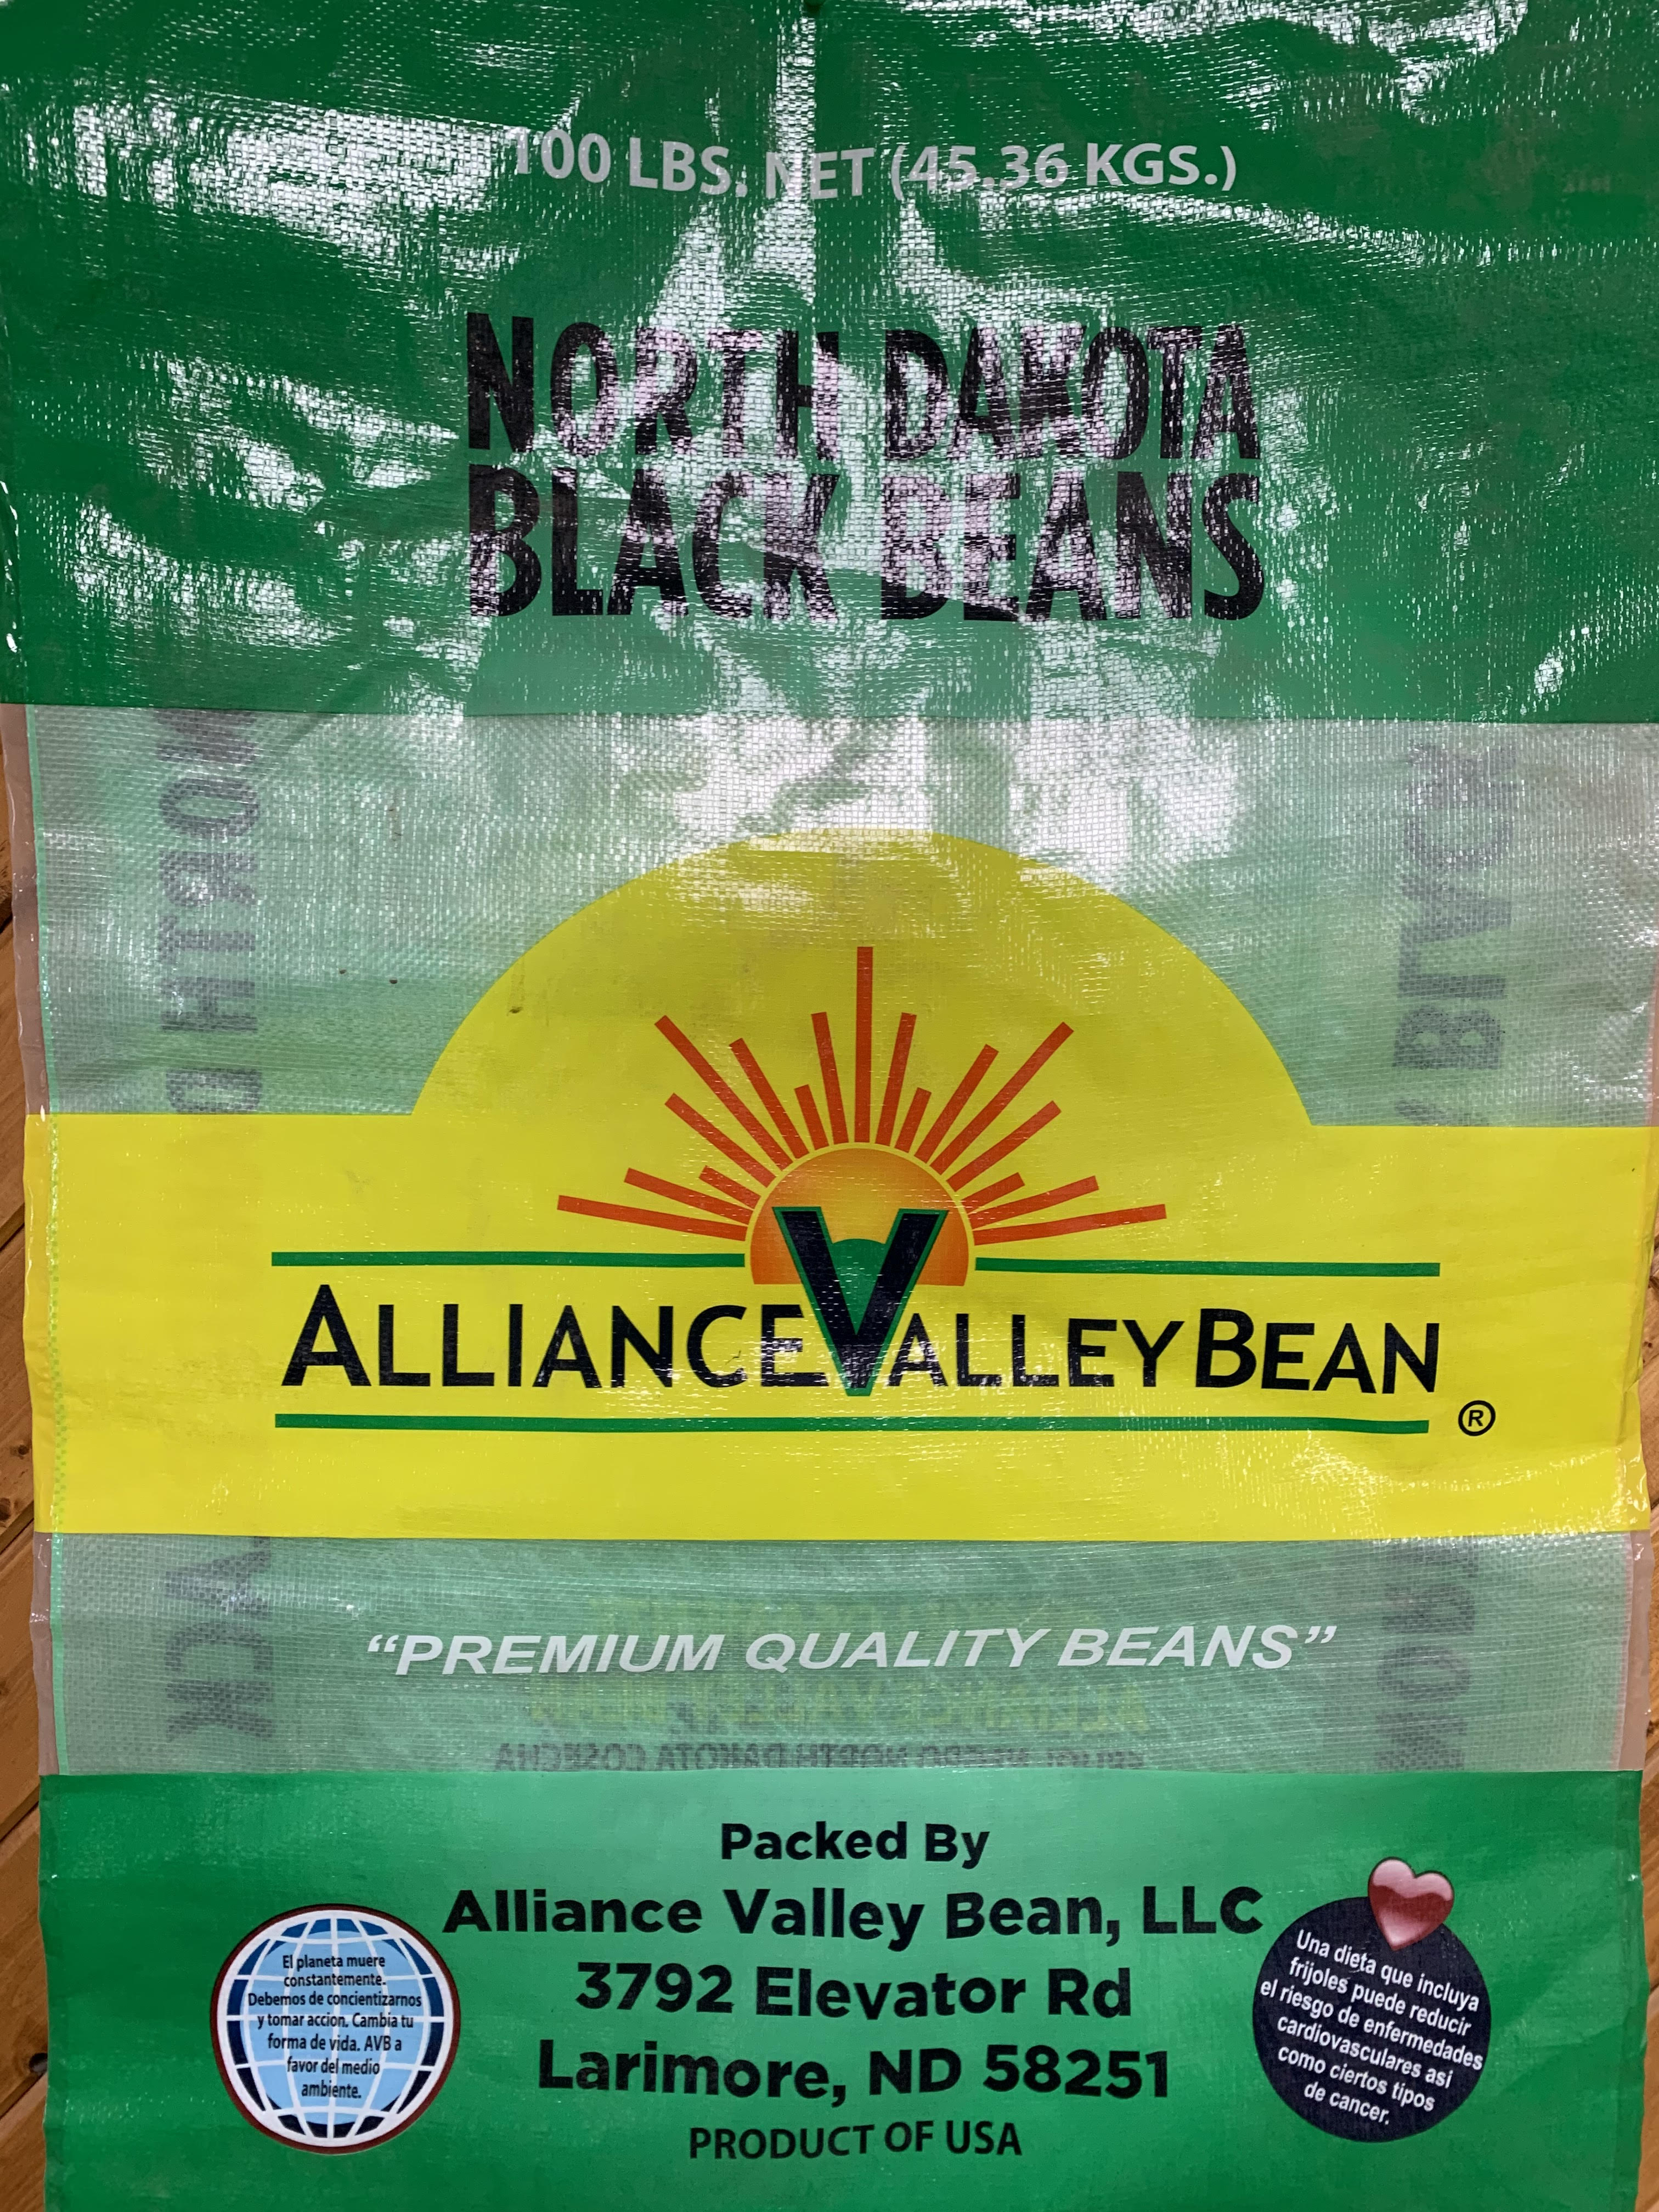 Warmer soil temperatures needed to plant this year's black bean crop